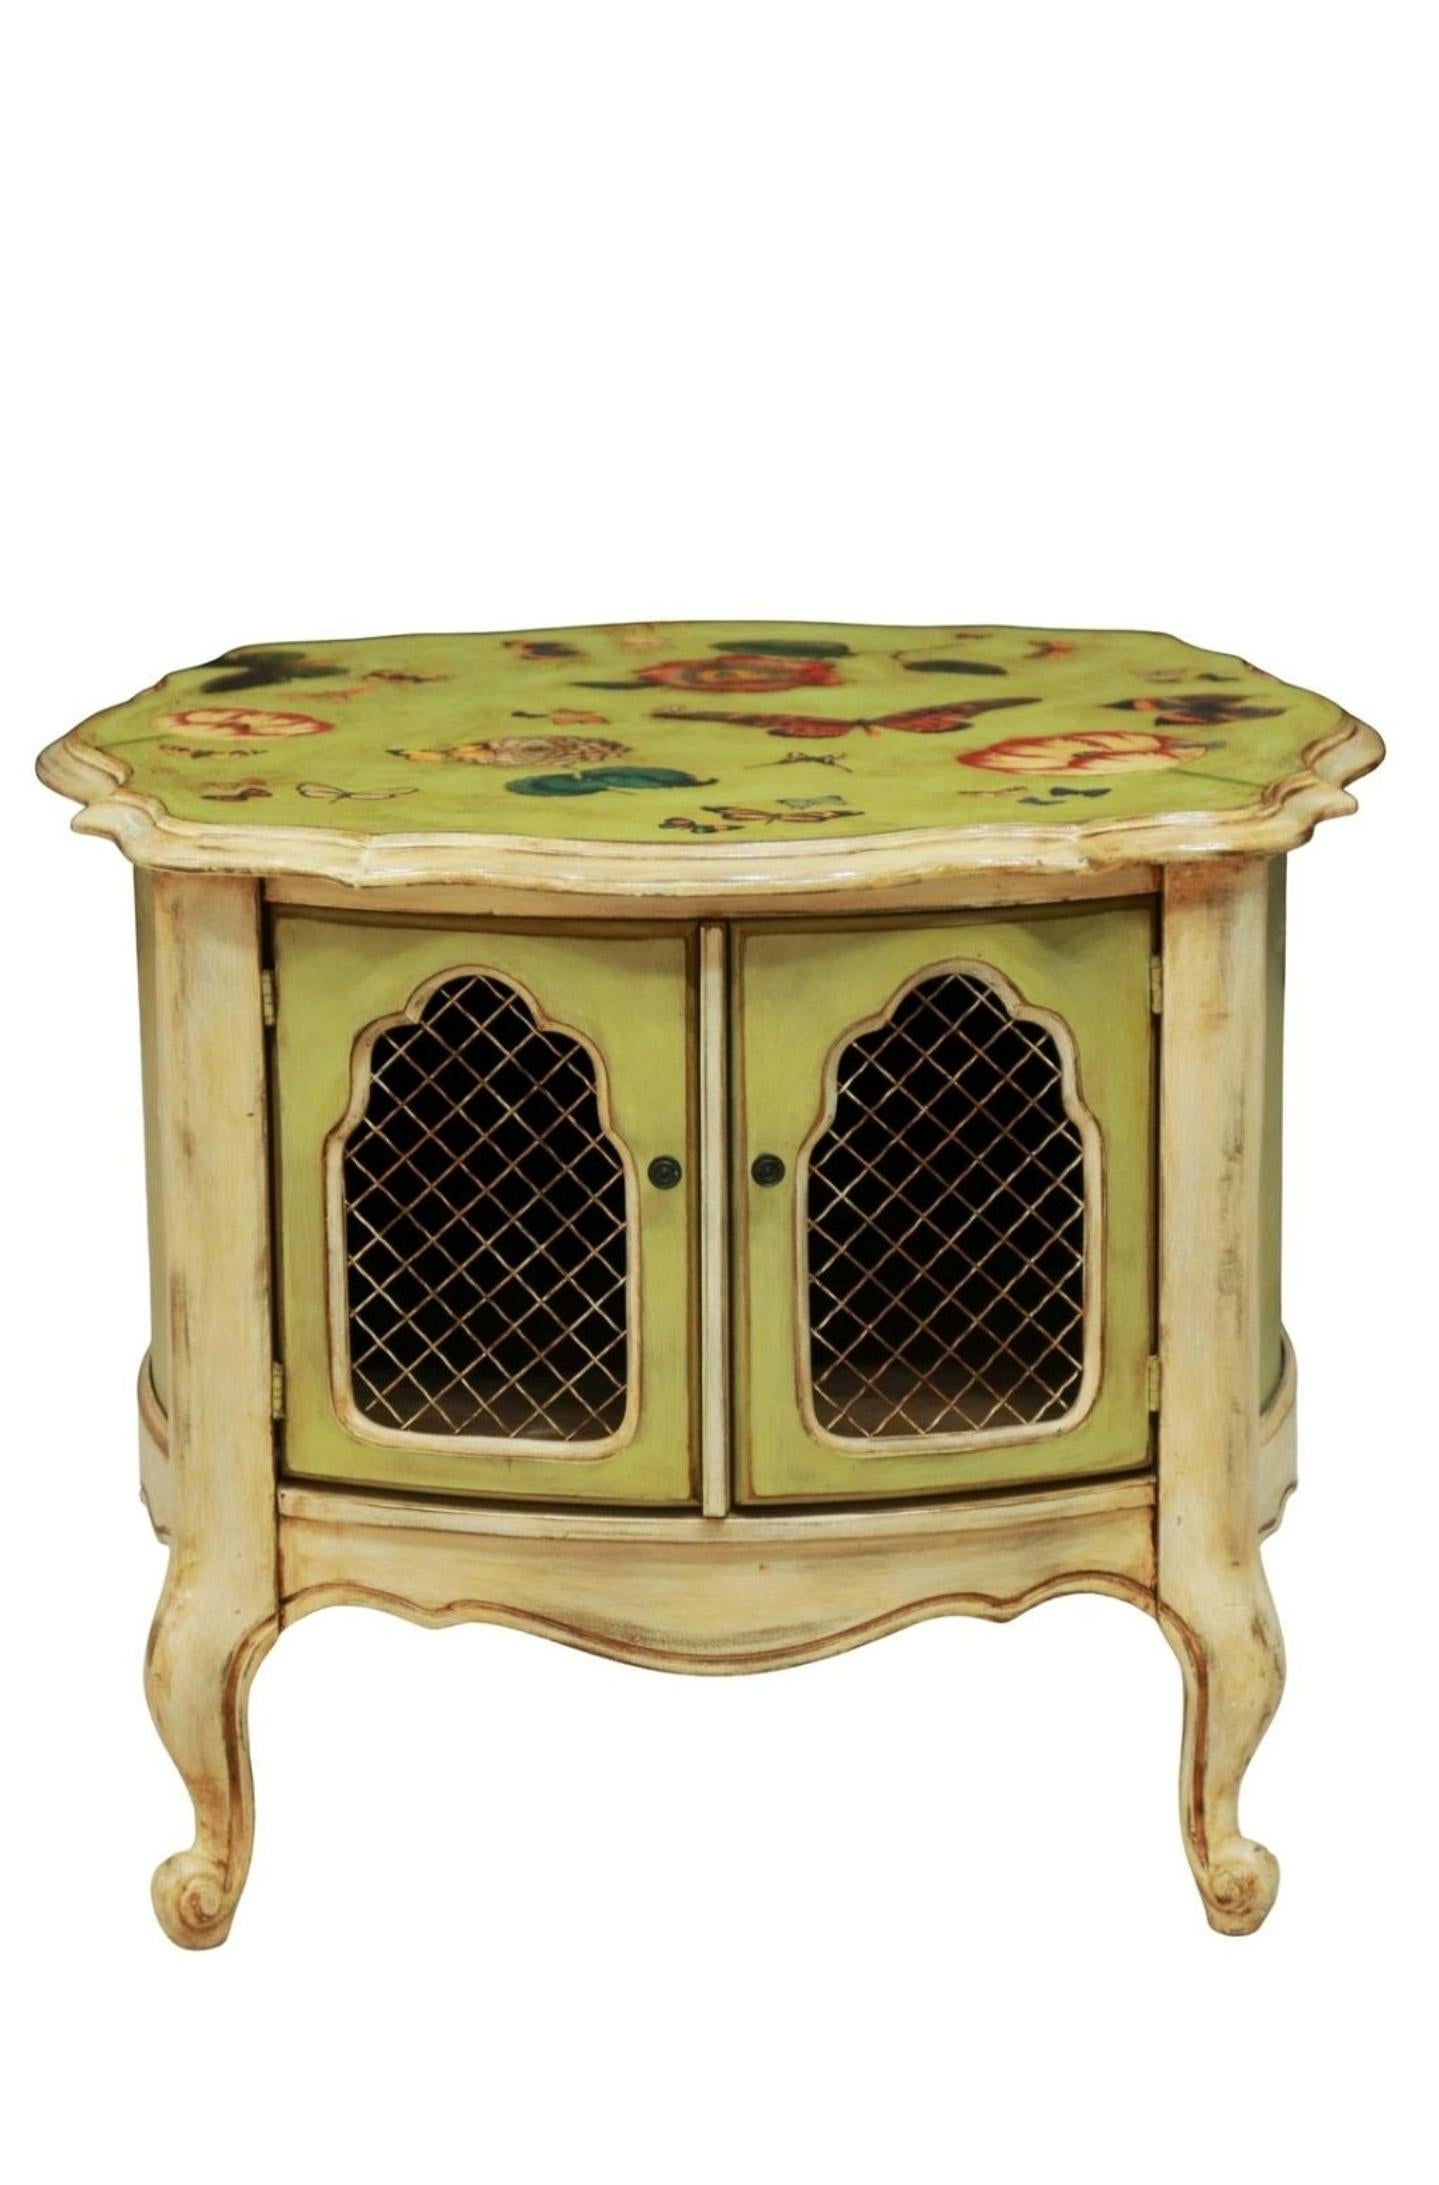 Vintage Italian Provincial Painted Decoupage End Table  In Good Condition For Sale In Forney, TX